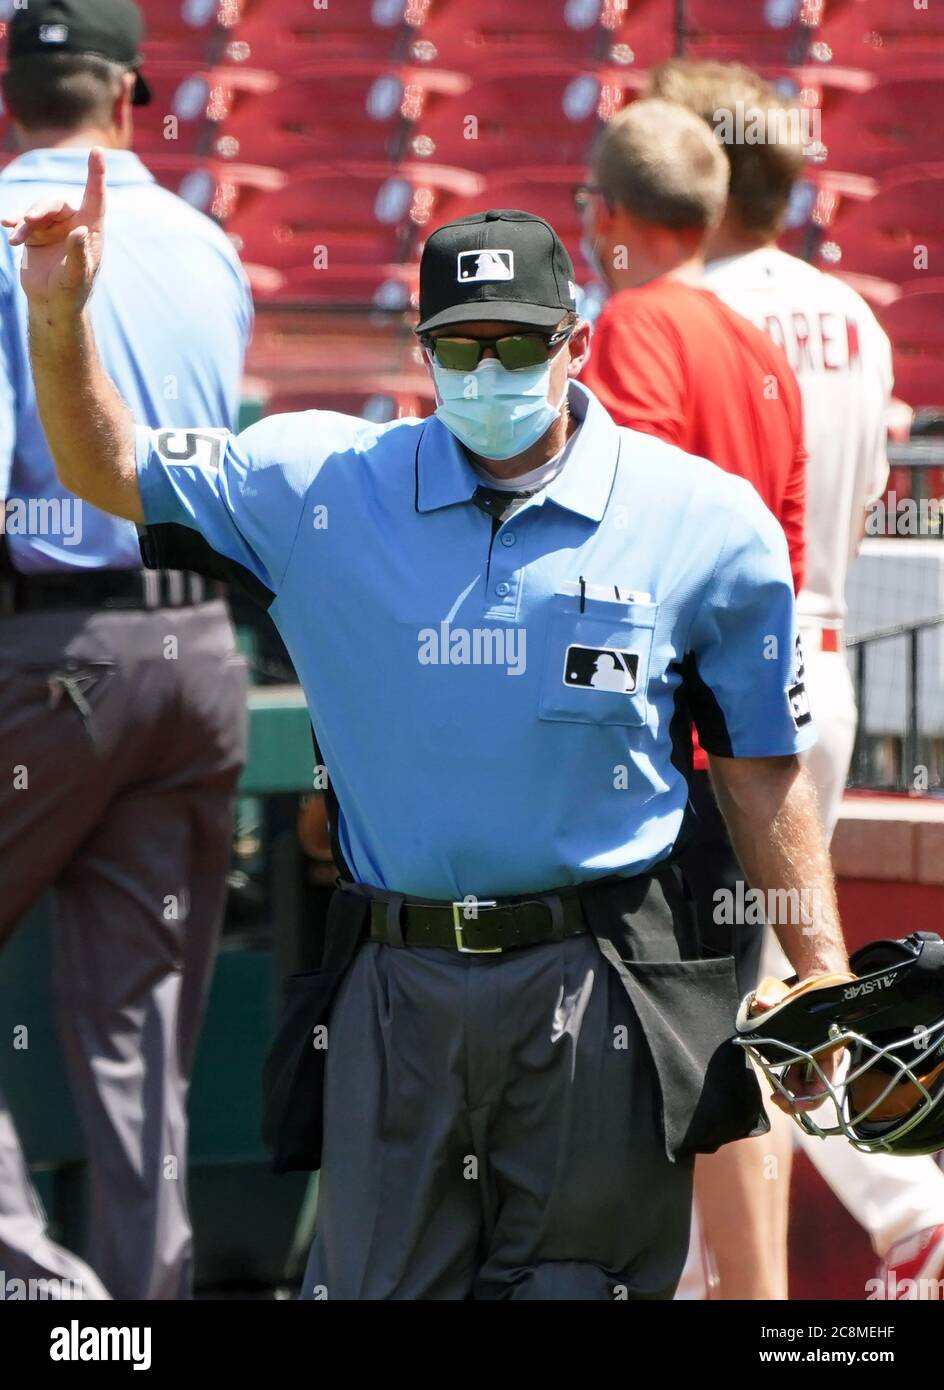 St. Louis, United States. 25th July, 2020. Home plate umpire Ed Hickox signals how many warm up pitches the Pittsburgh Pirates pitcher has before the fifth inning resumes against the St. Louis Cardinals at Busch Stadium in St. Louis on Saturday, July 25, 2020. Photo by Bill Greenblatt/UPI Credit: UPI/Alamy Live News Stock Photo